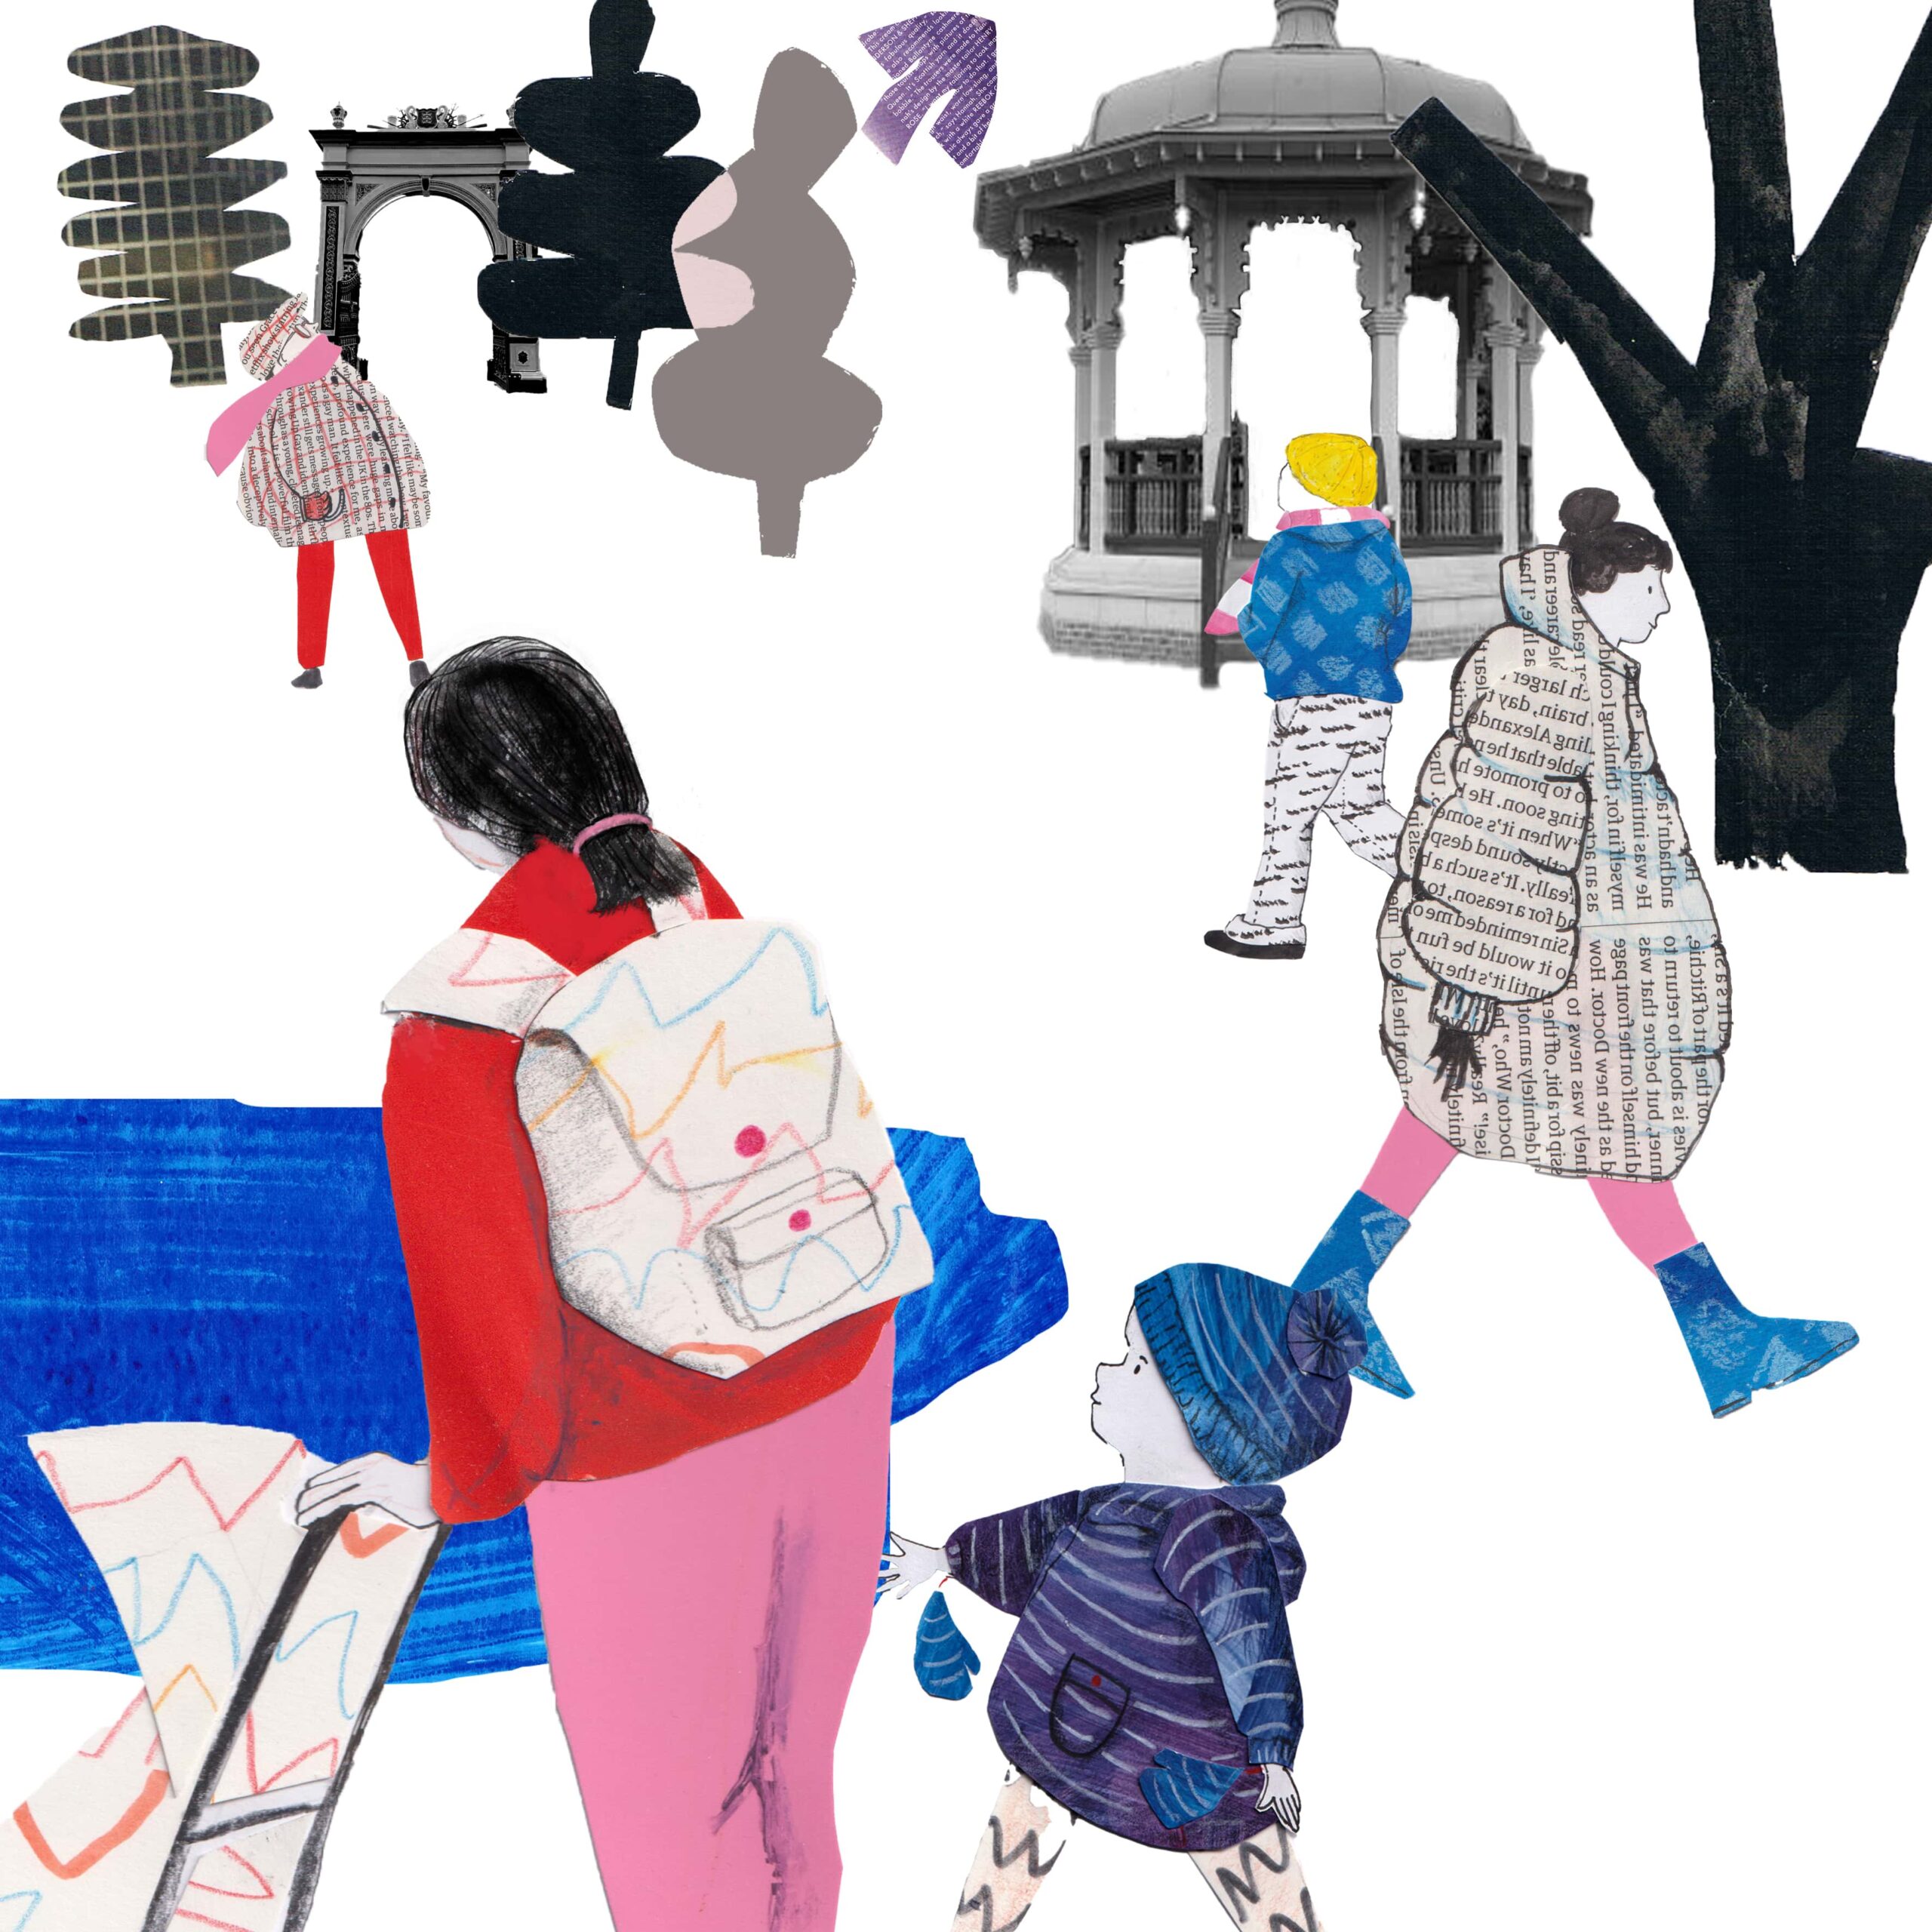 A scene in black, white blue and red of people in a park. At the front a woman puches a push chair next to a toddler. She looks over a pond toward people walking in the park. A man looks up at the sky at a bird. The work is mixed media paint and collage.